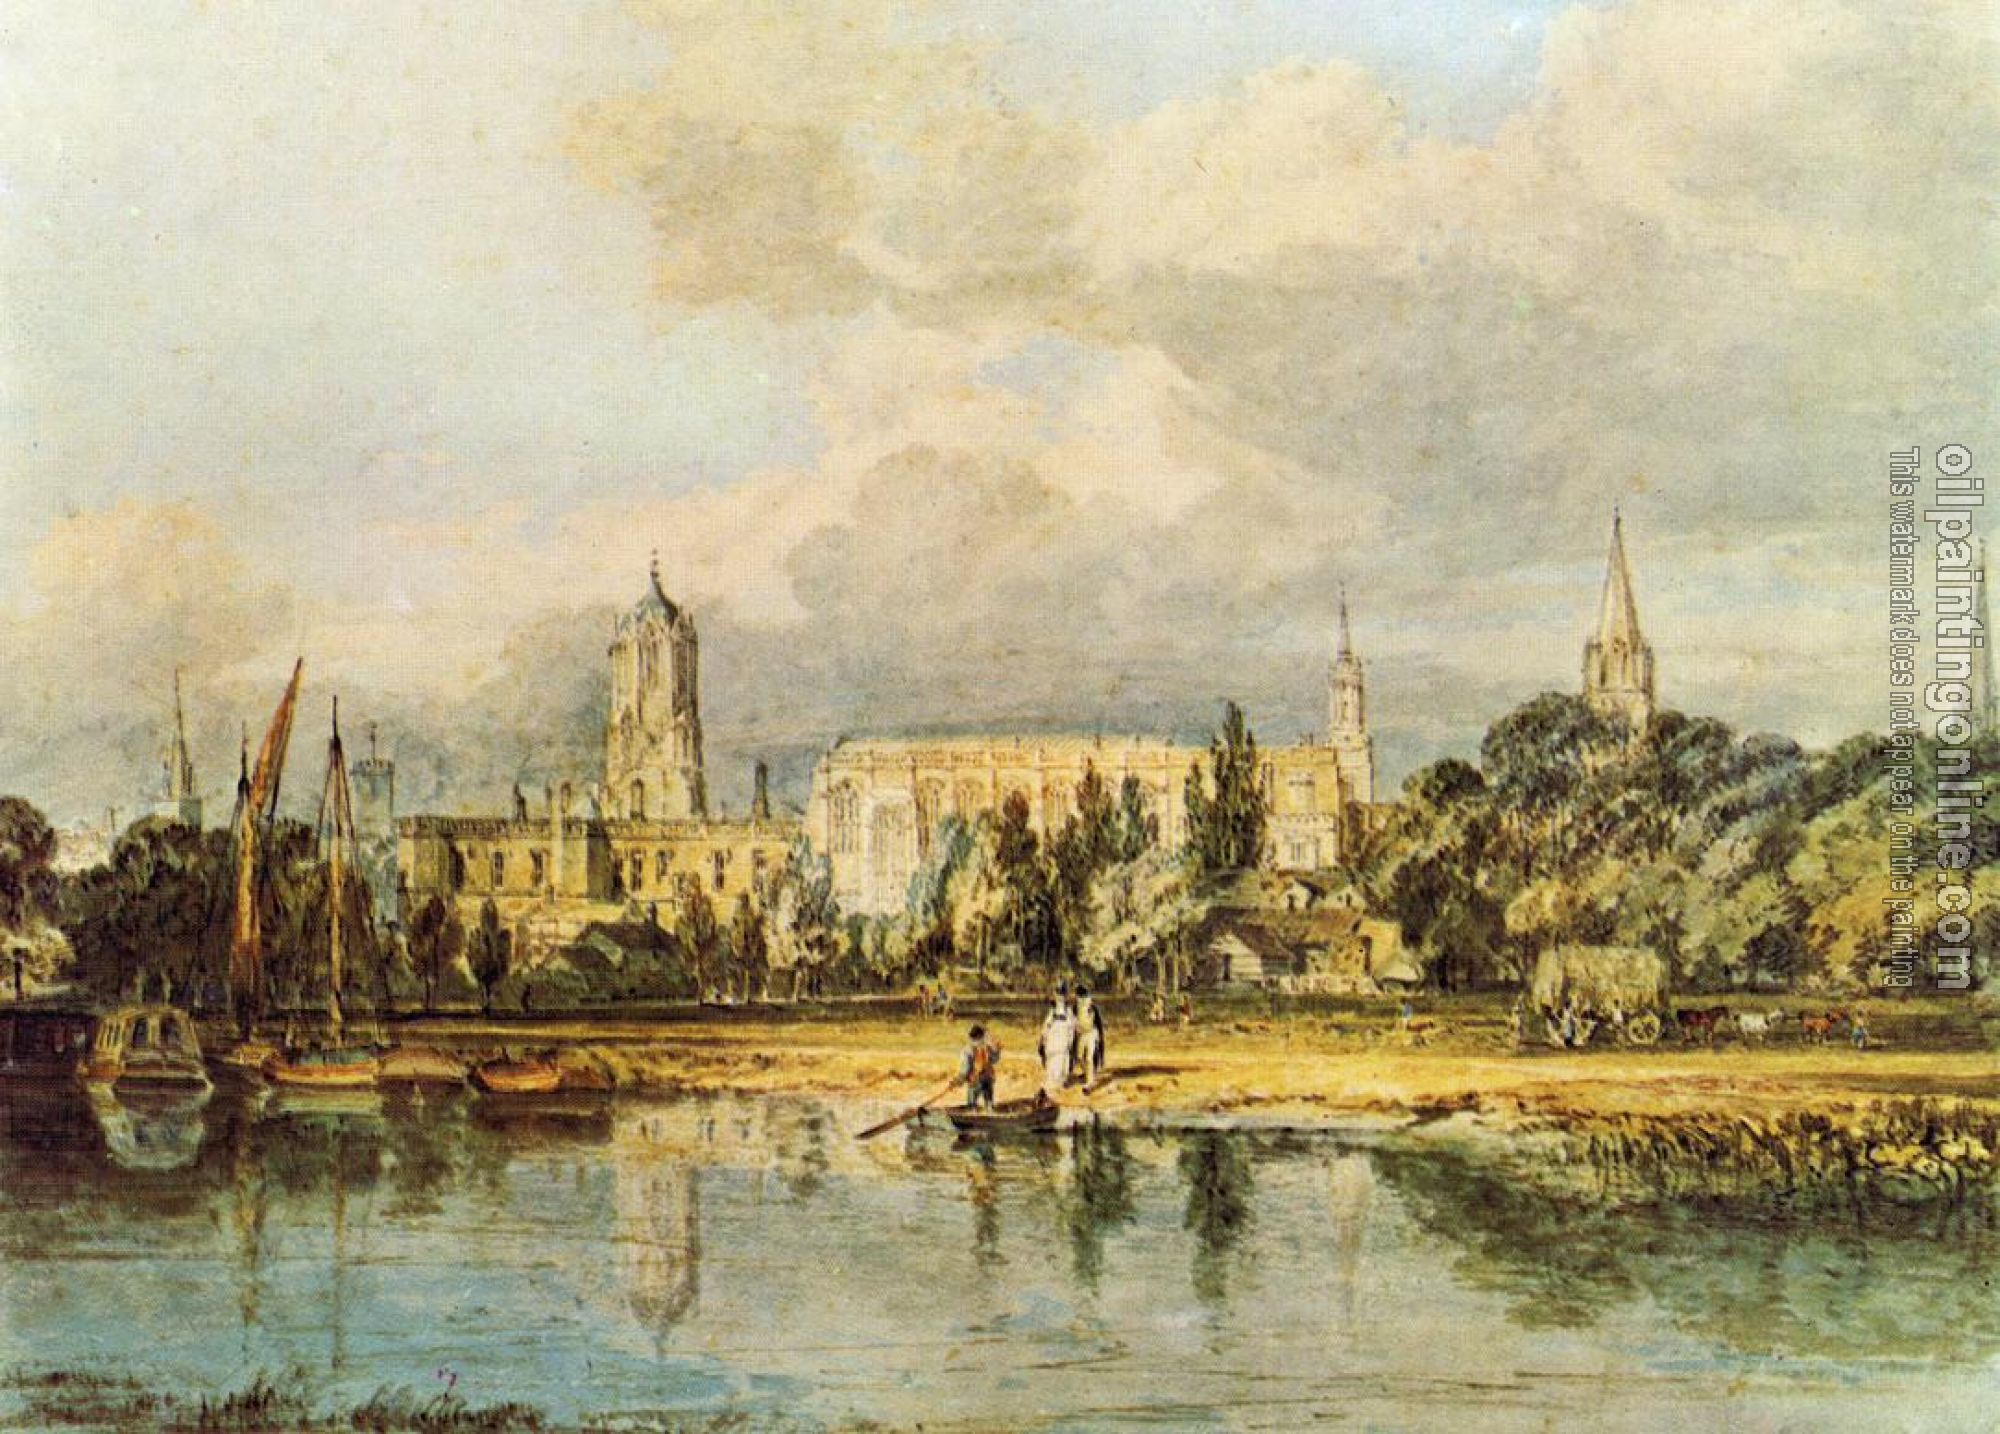 Turner, Joseph Mallord William - South View of Christ Church, etc., from the Meadows